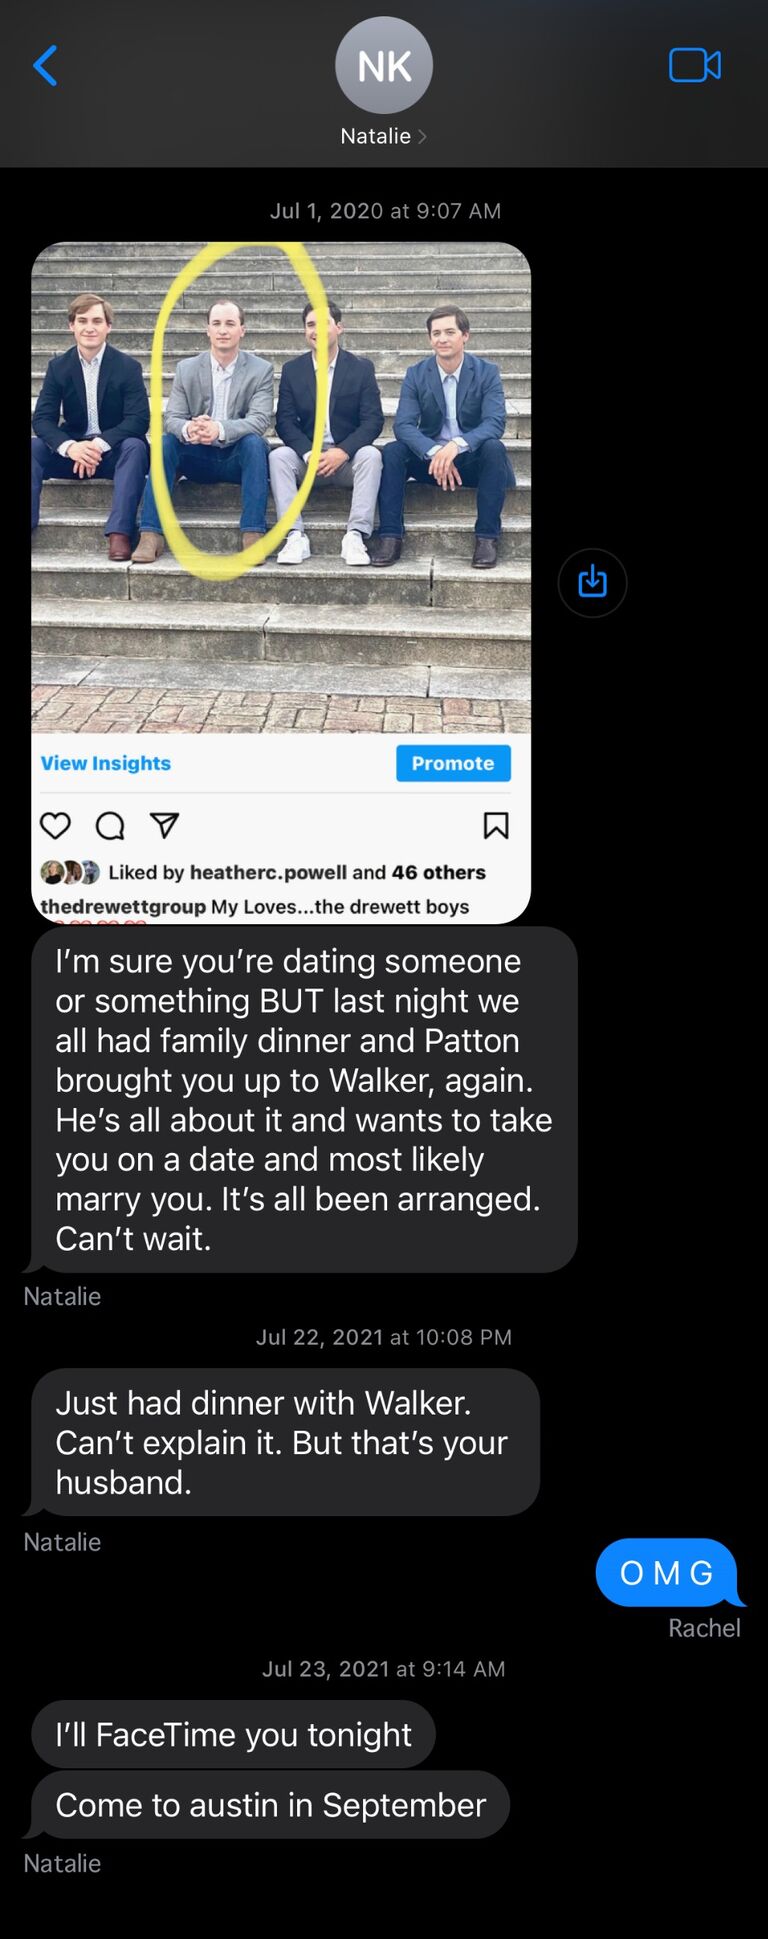 A text message from Natalie to Rachel after family dinner.